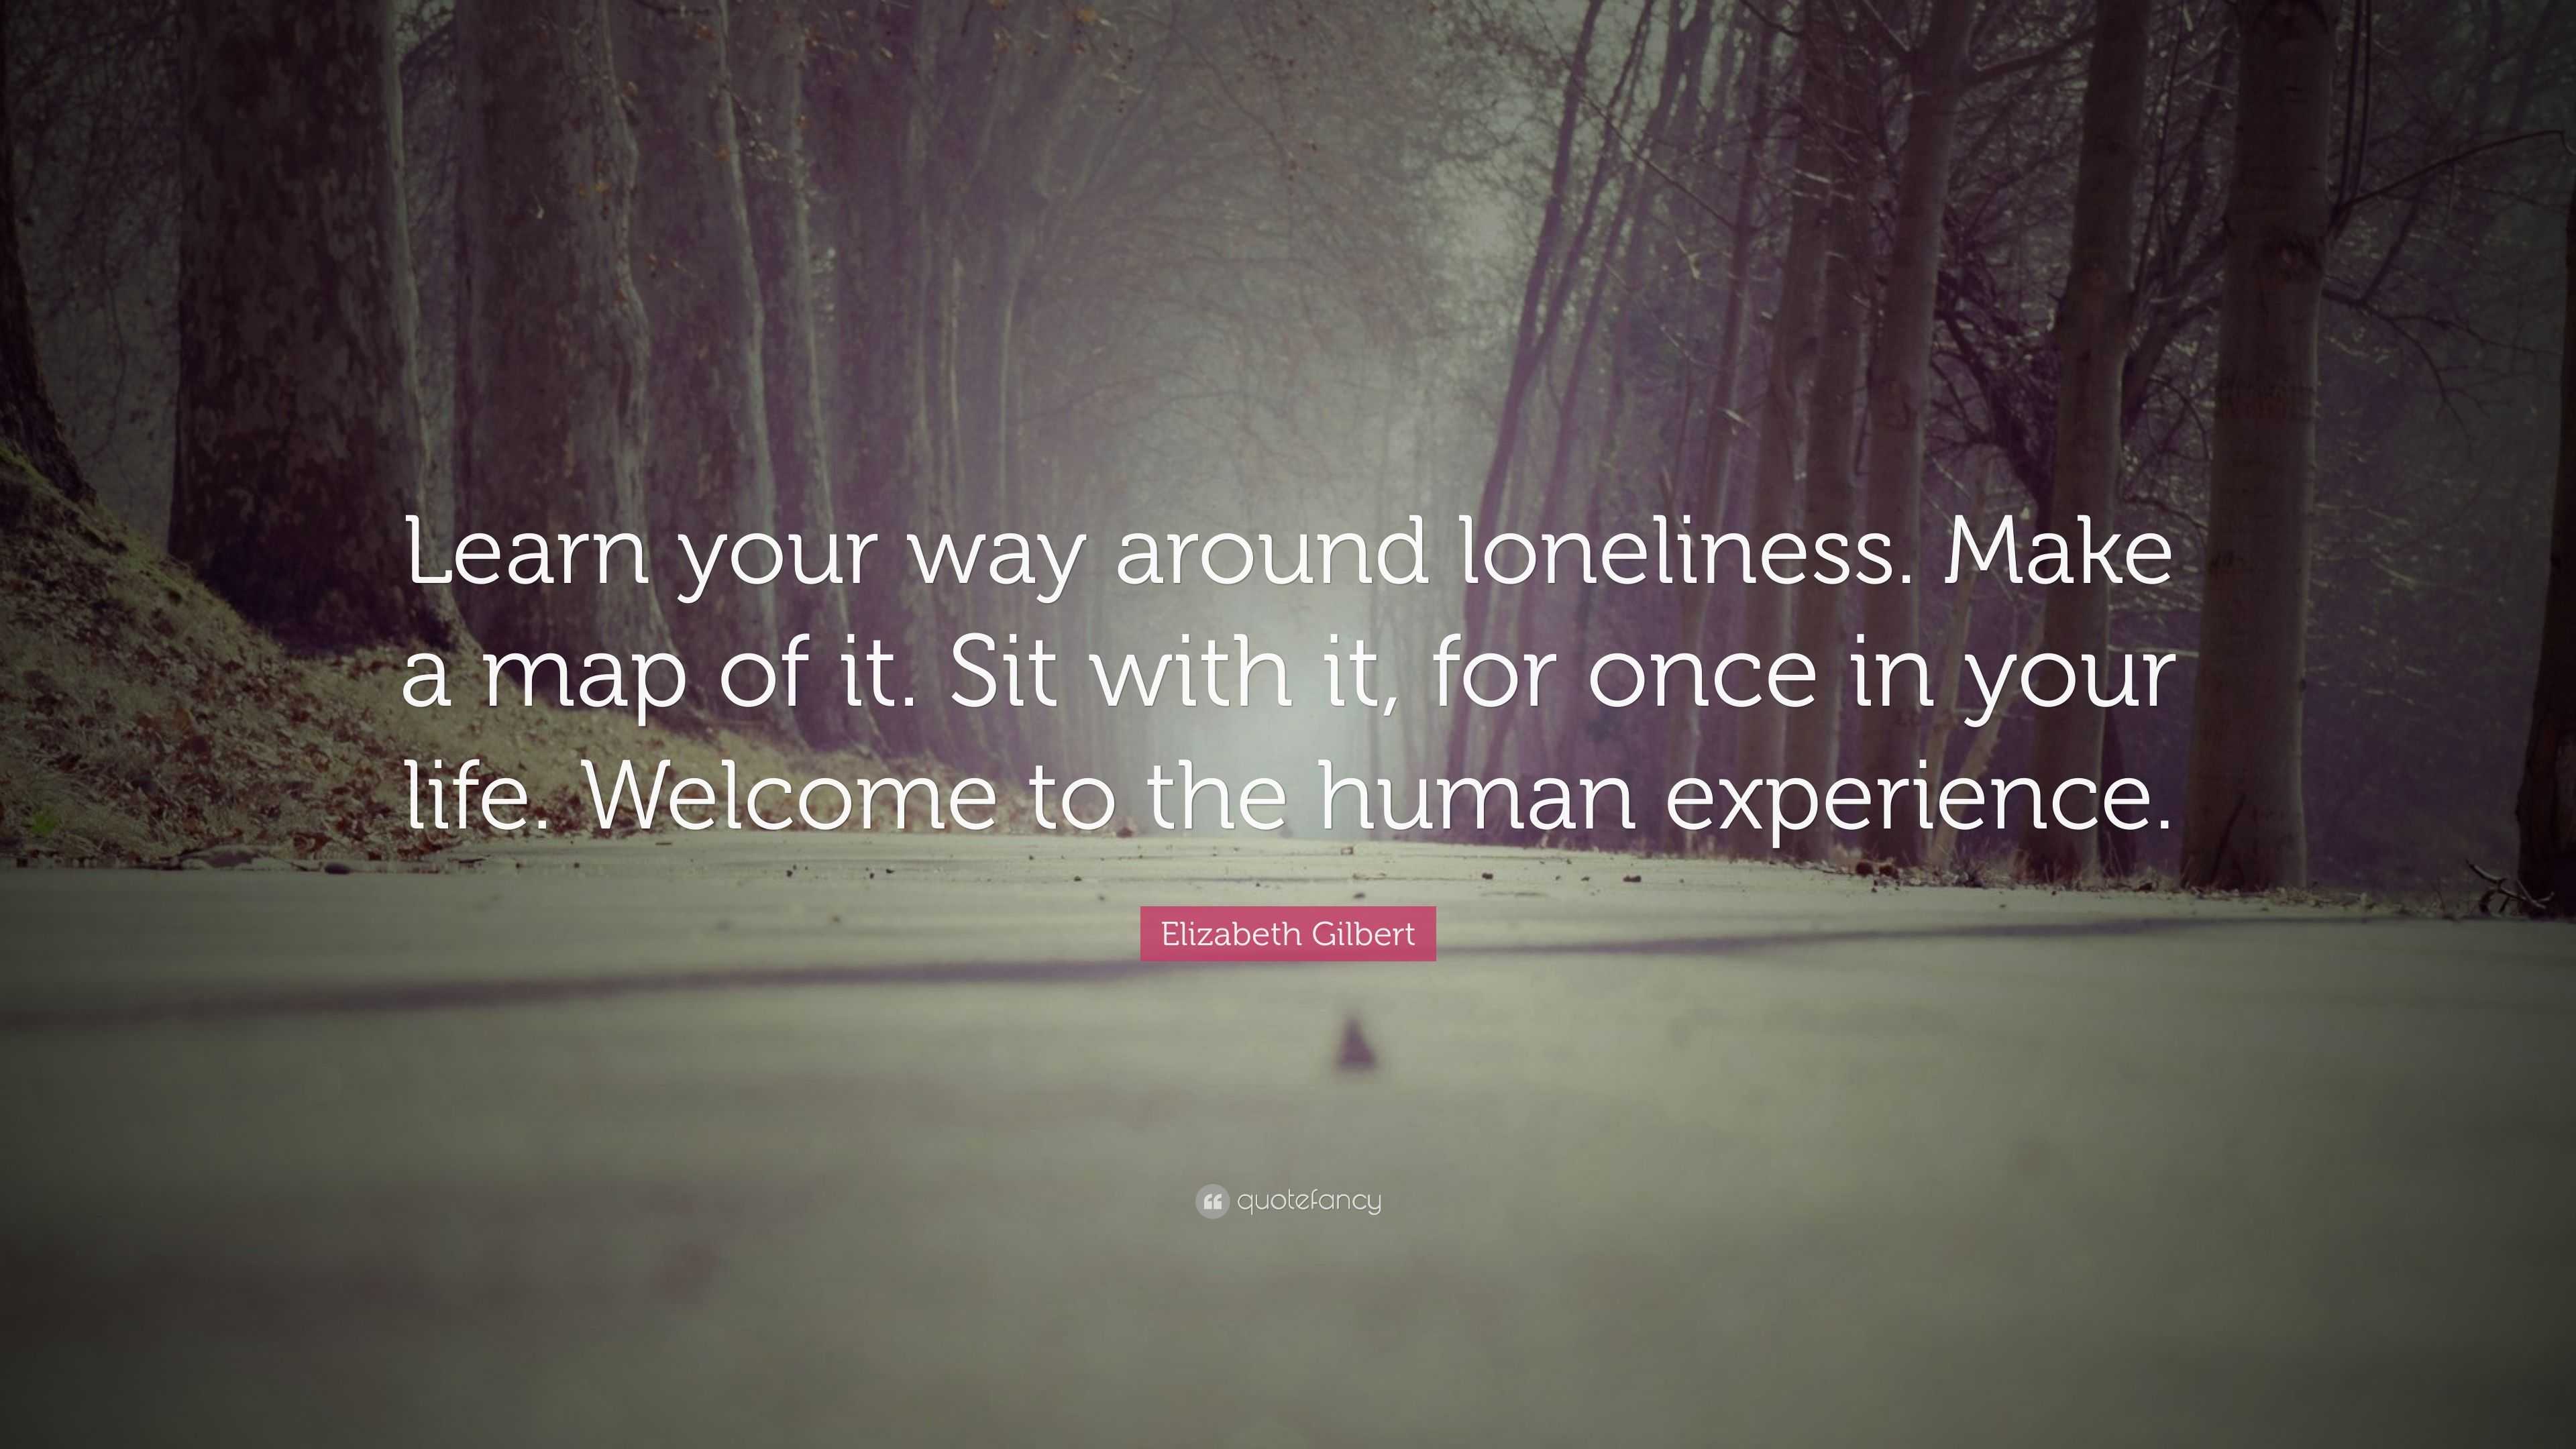 Welcome to loneliness